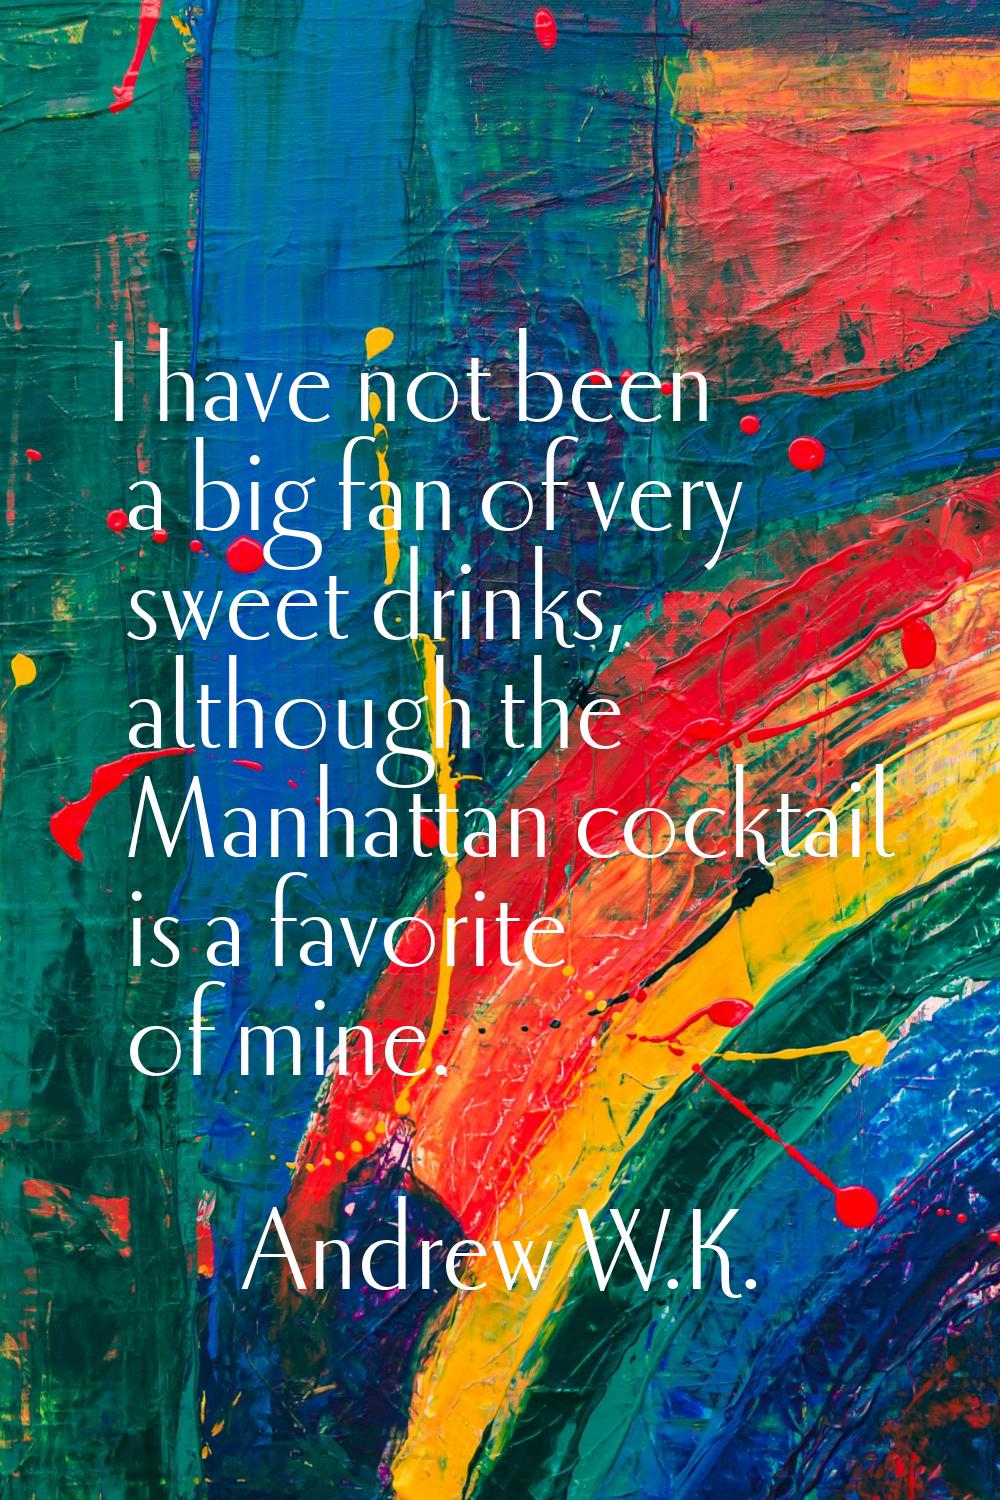 I have not been a big fan of very sweet drinks, although the Manhattan cocktail is a favorite of mi